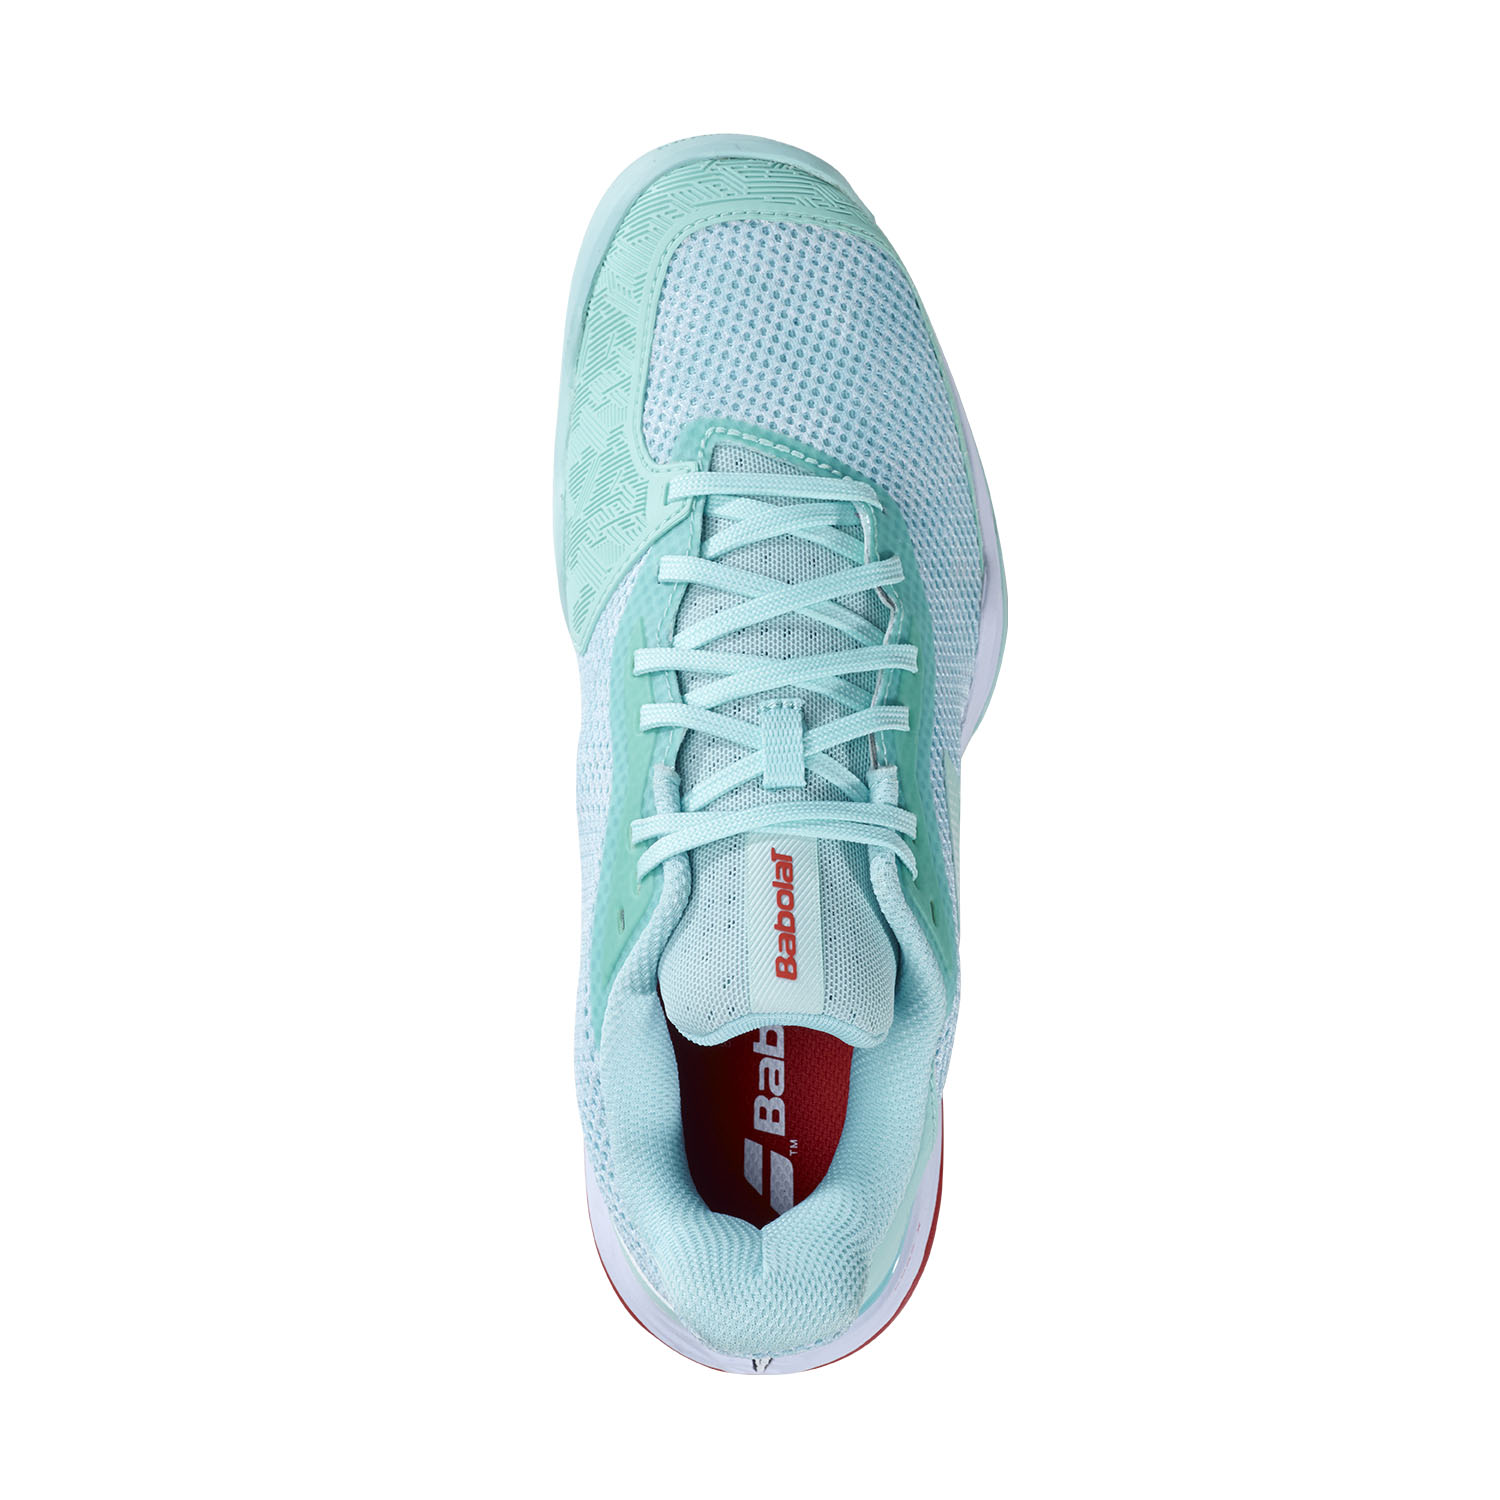 Babolat Jet Tere Clay - Yucca/White